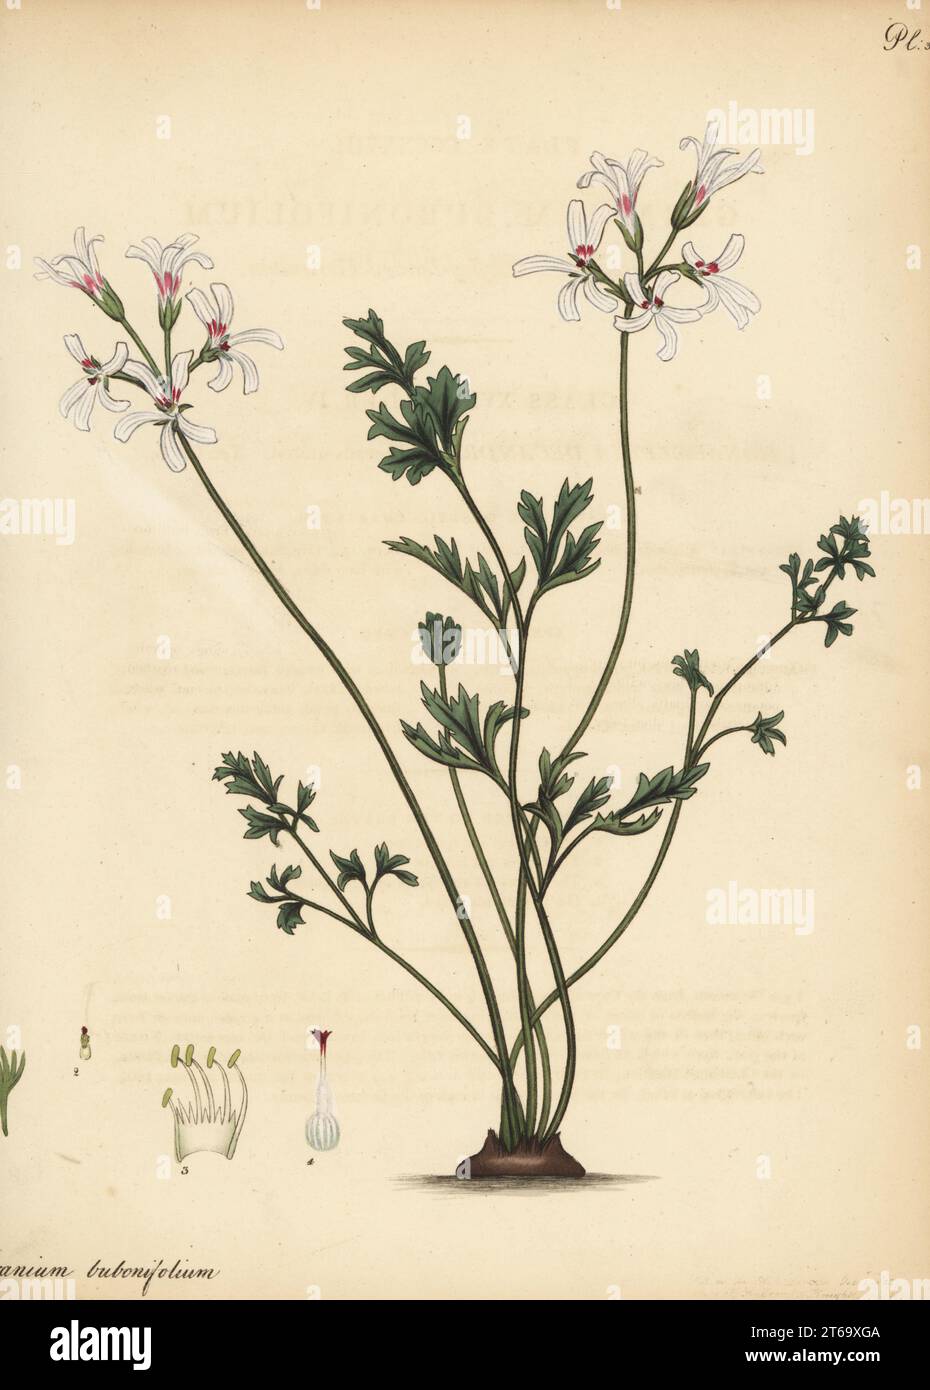 Pelargonium bubonifolium. Macedonian-parsley-leaved geranium, Geranium bubonifolium. From the Cape of Good Hope, South Africa, in Clapham Nursery. Copperplate engraving drawn, engraved and hand-coloured by Henry Andrews from his Botanical Register, Volume 5, self-published in Knightsbridge, London, 1803. Stock Photo